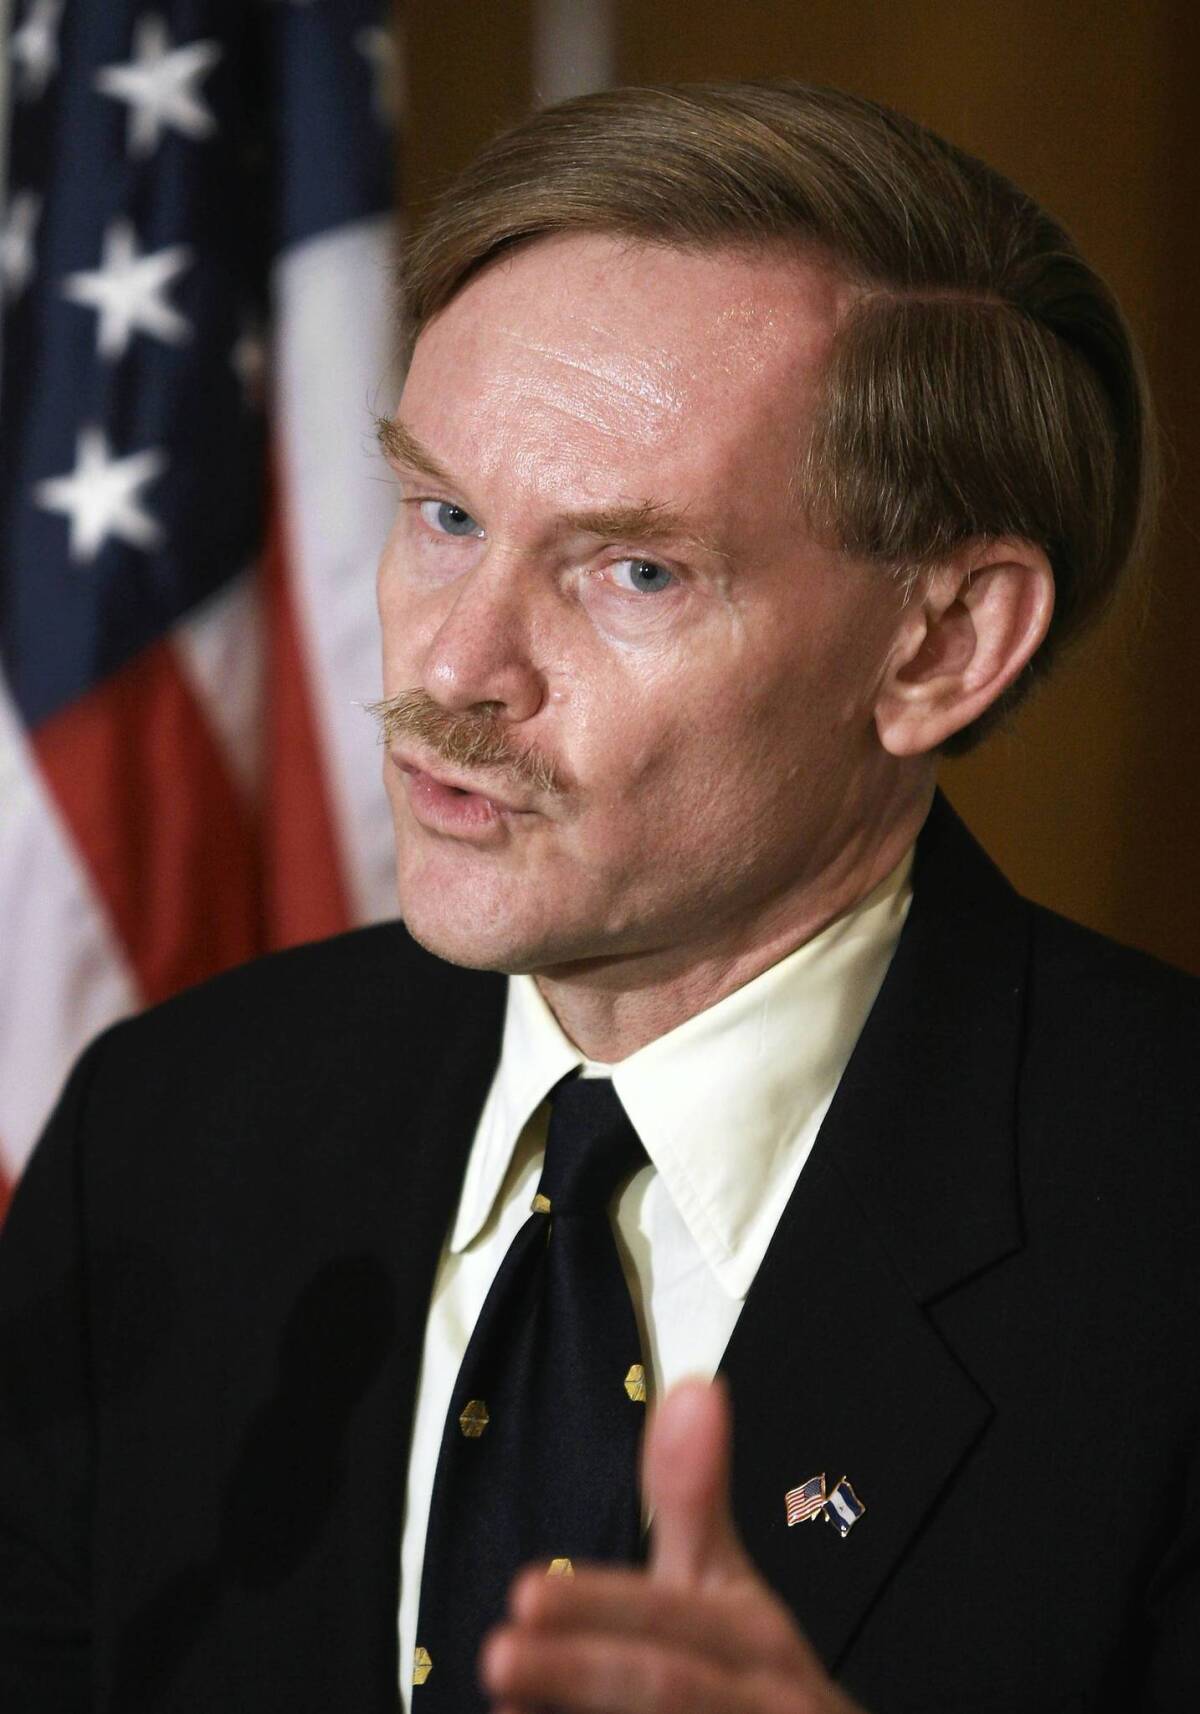 Former Bush administration official Robert Zoellick was to speak at Swarthmore College.